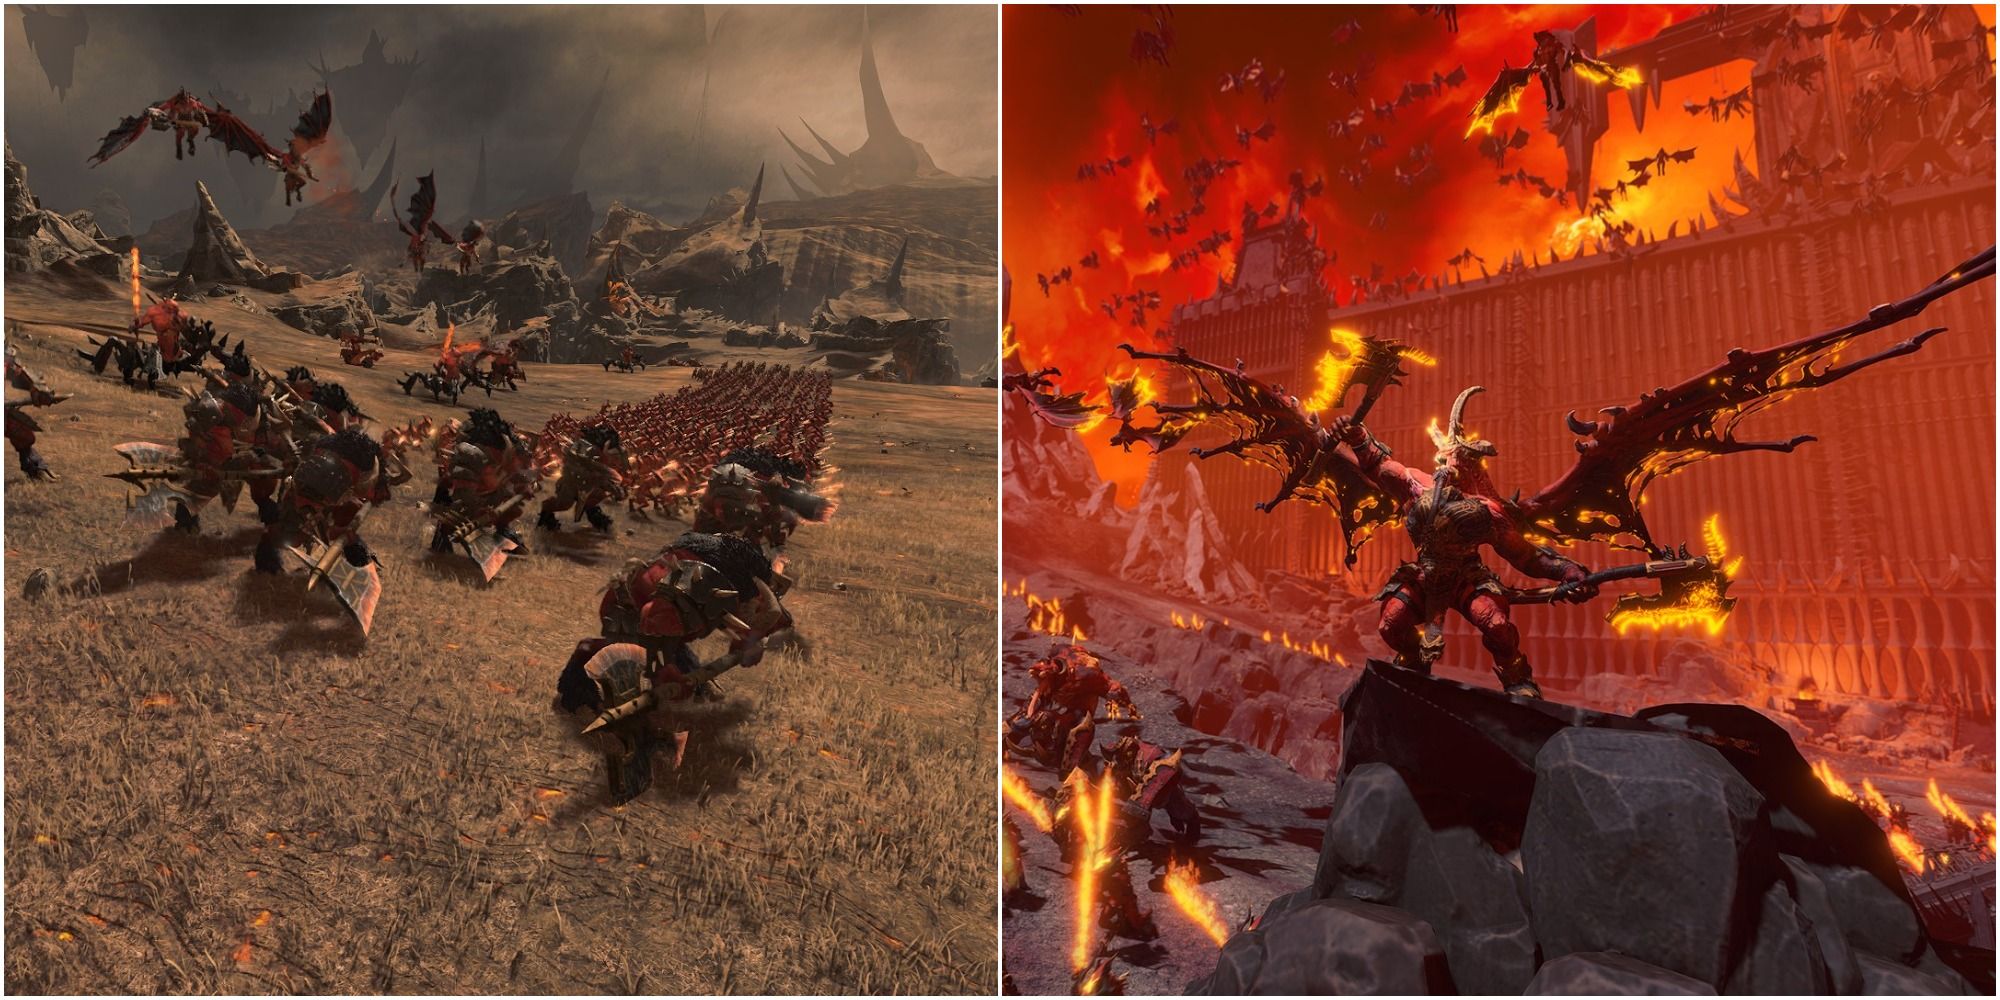 Total War Warhammer 3 Khorne showing army roster and Skarbrand the legendary lord